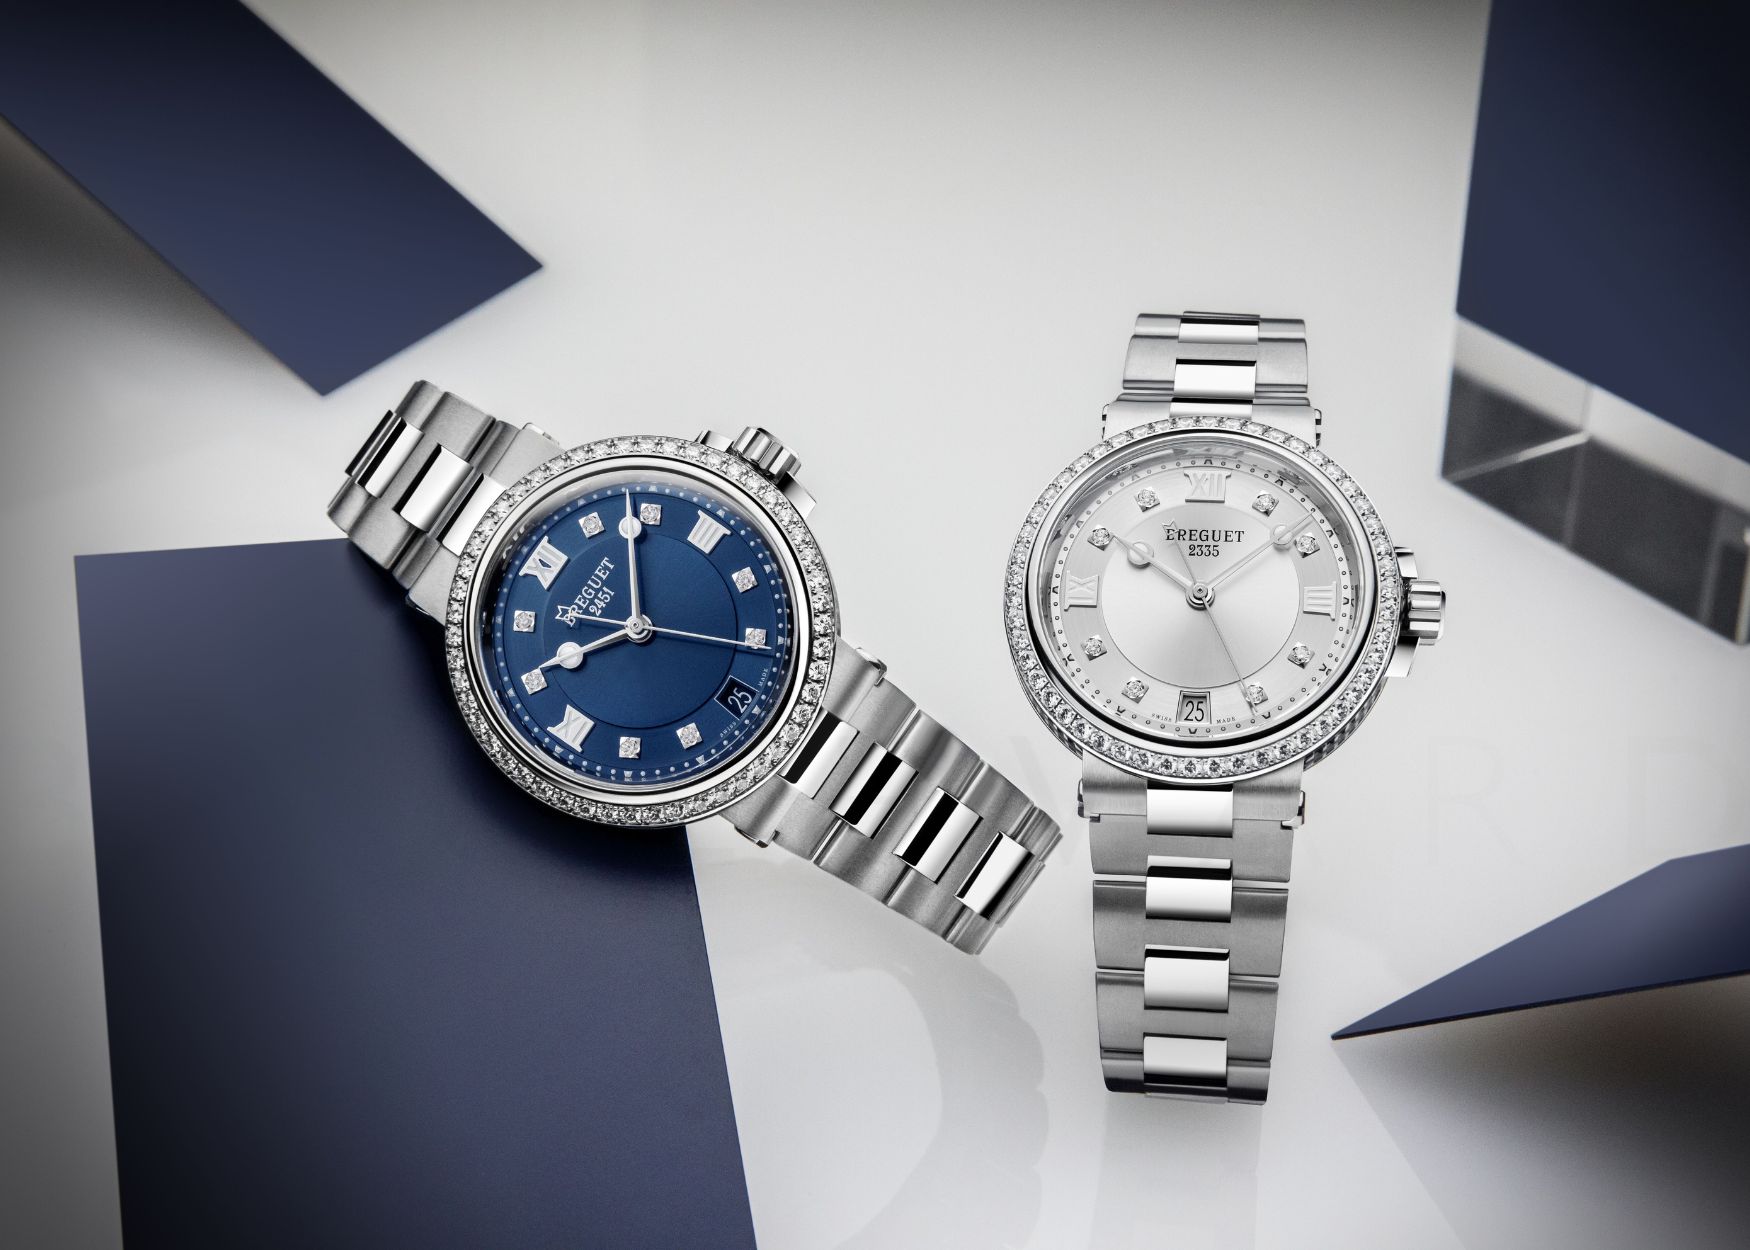 Breguet Introduces the New Marine Collection with Diamonds